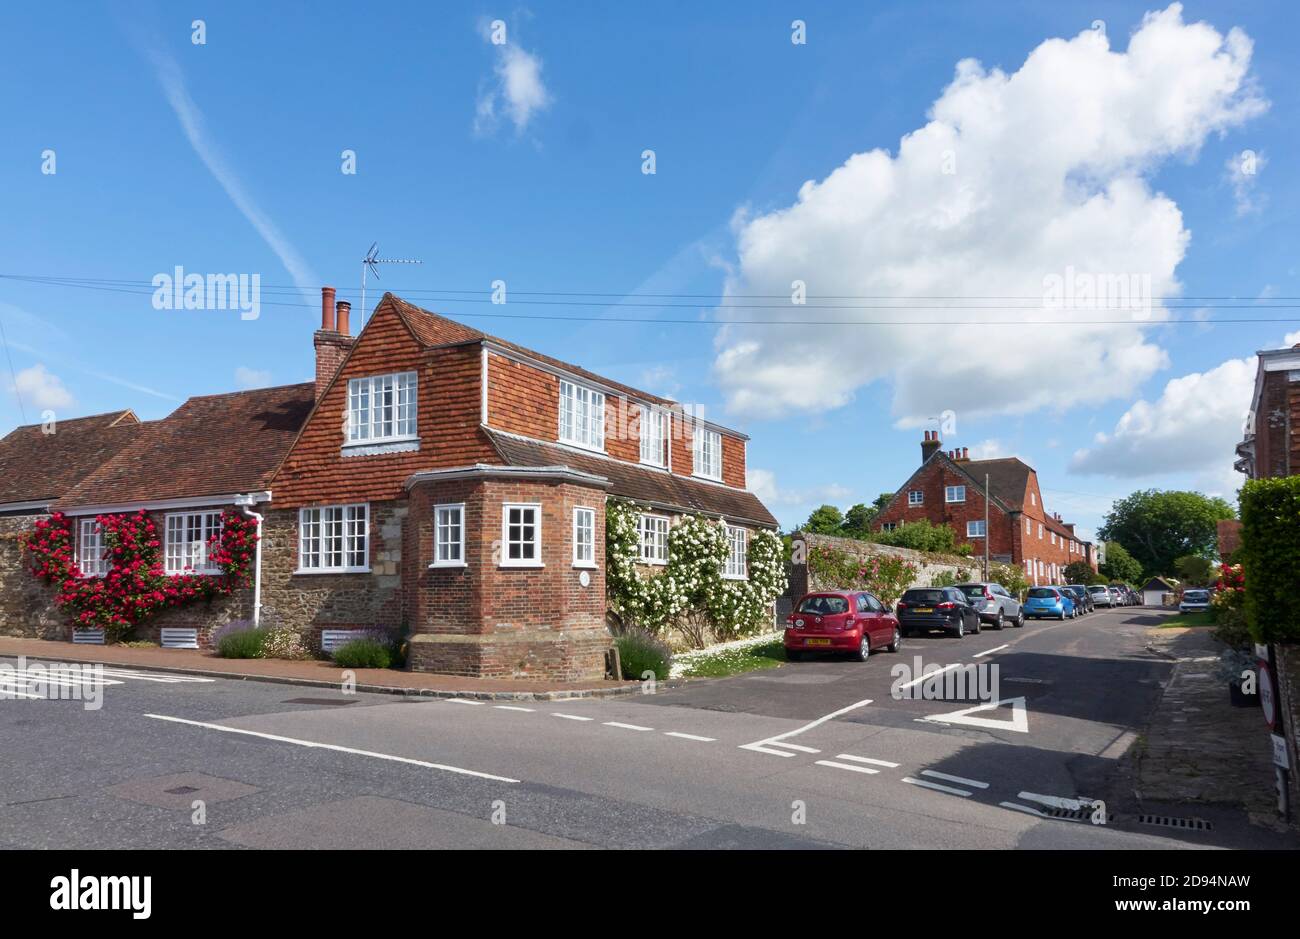 Rose covered houses in Winchelsea, East Sussex, UK Stock Photo